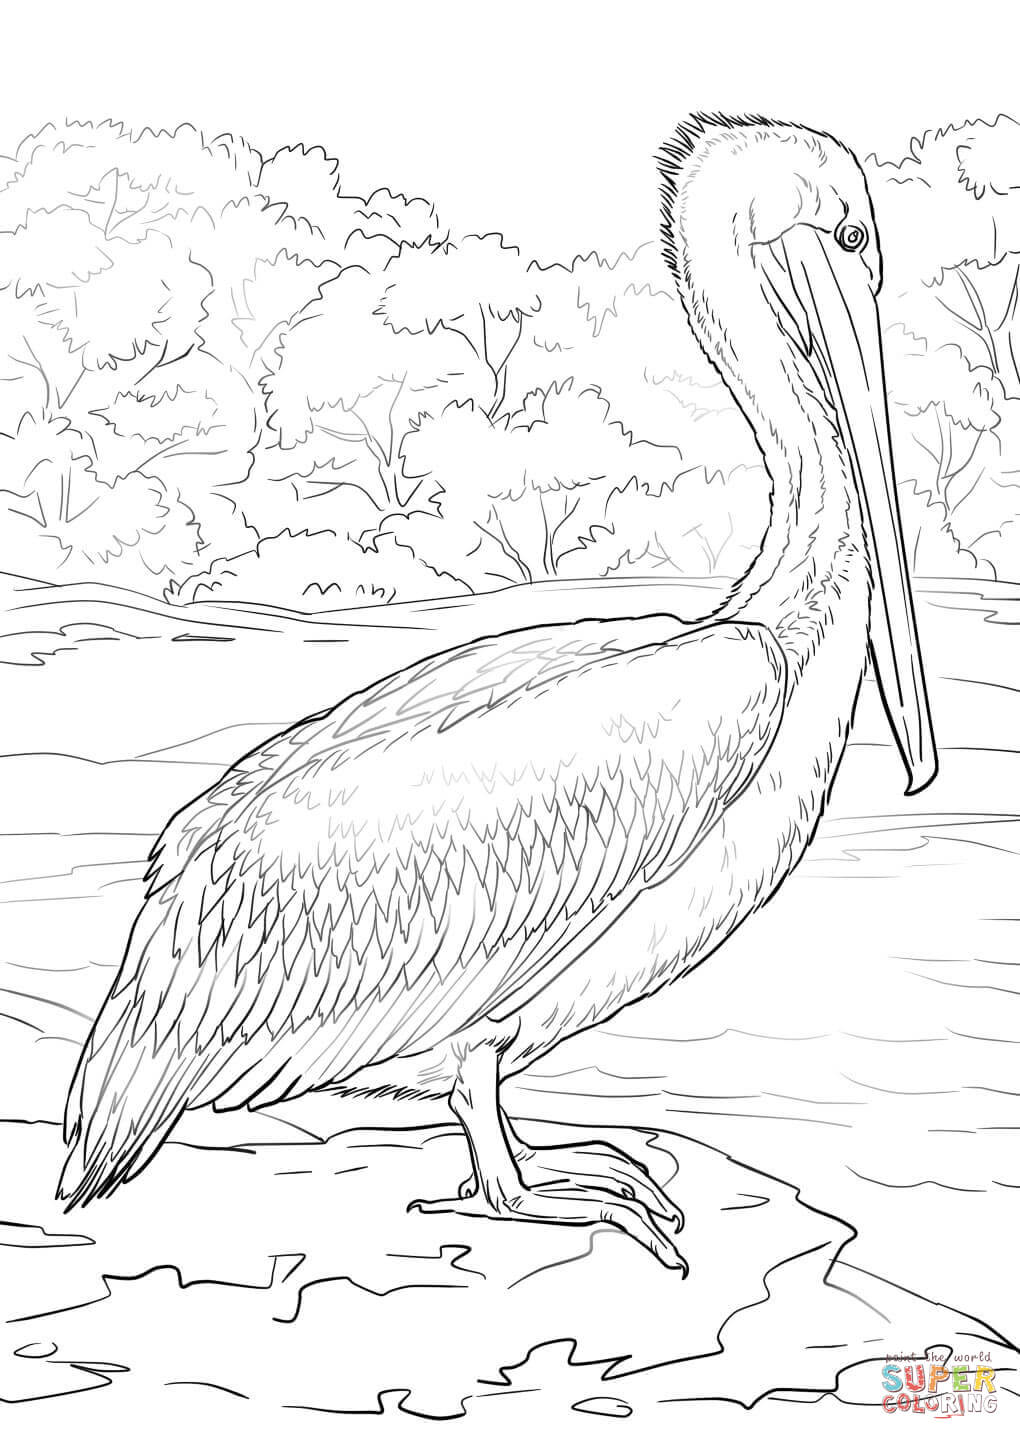 Eastern Brown Pelican coloring page | Free Printable Coloring Pages